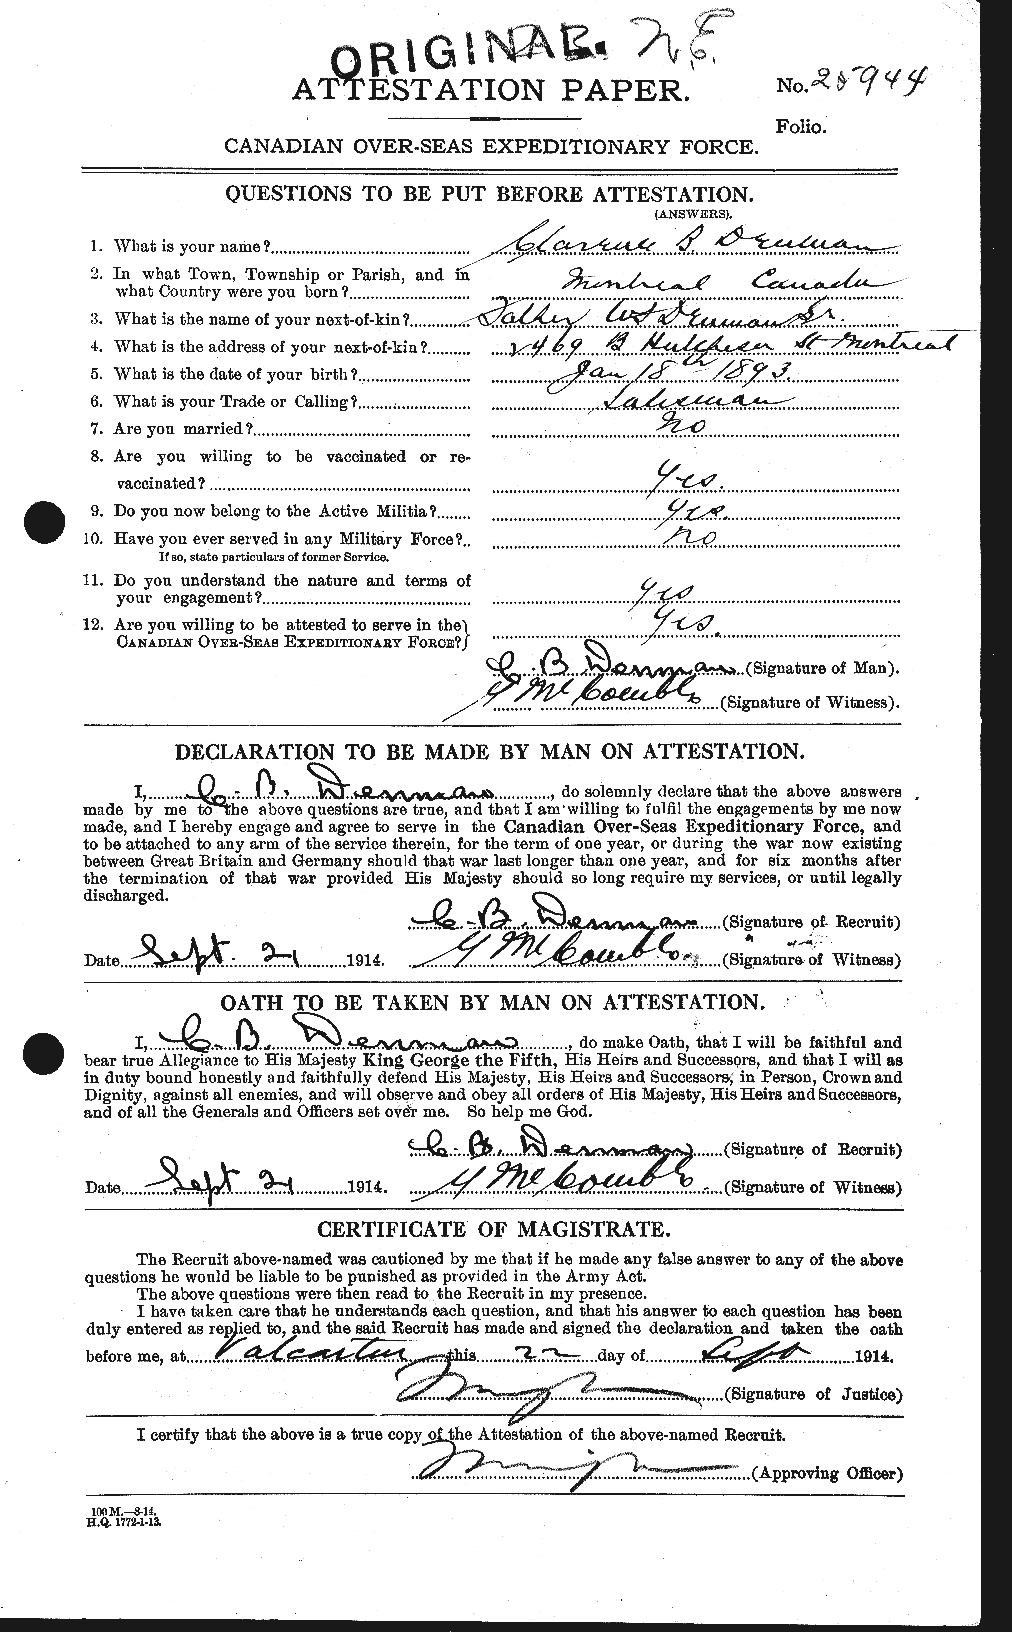 Personnel Records of the First World War - CEF 288113a